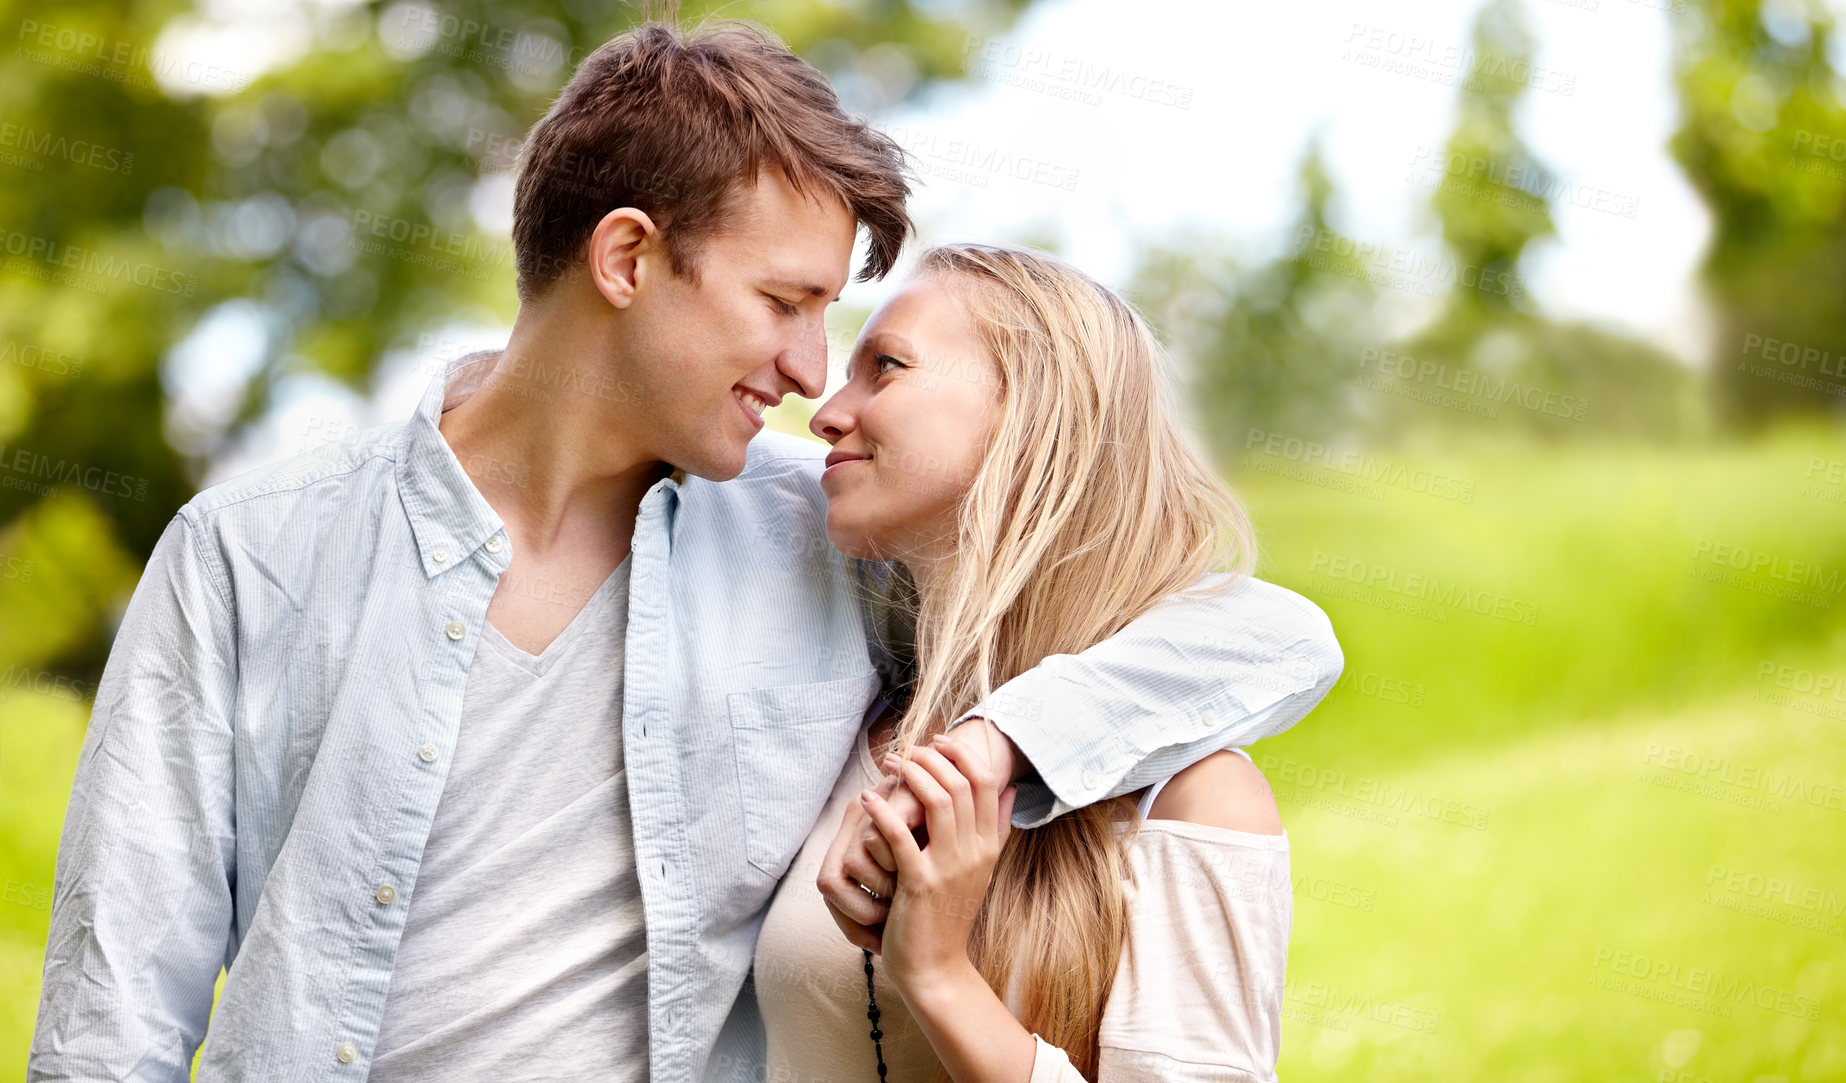 Buy stock photo Young couple standing together in the park